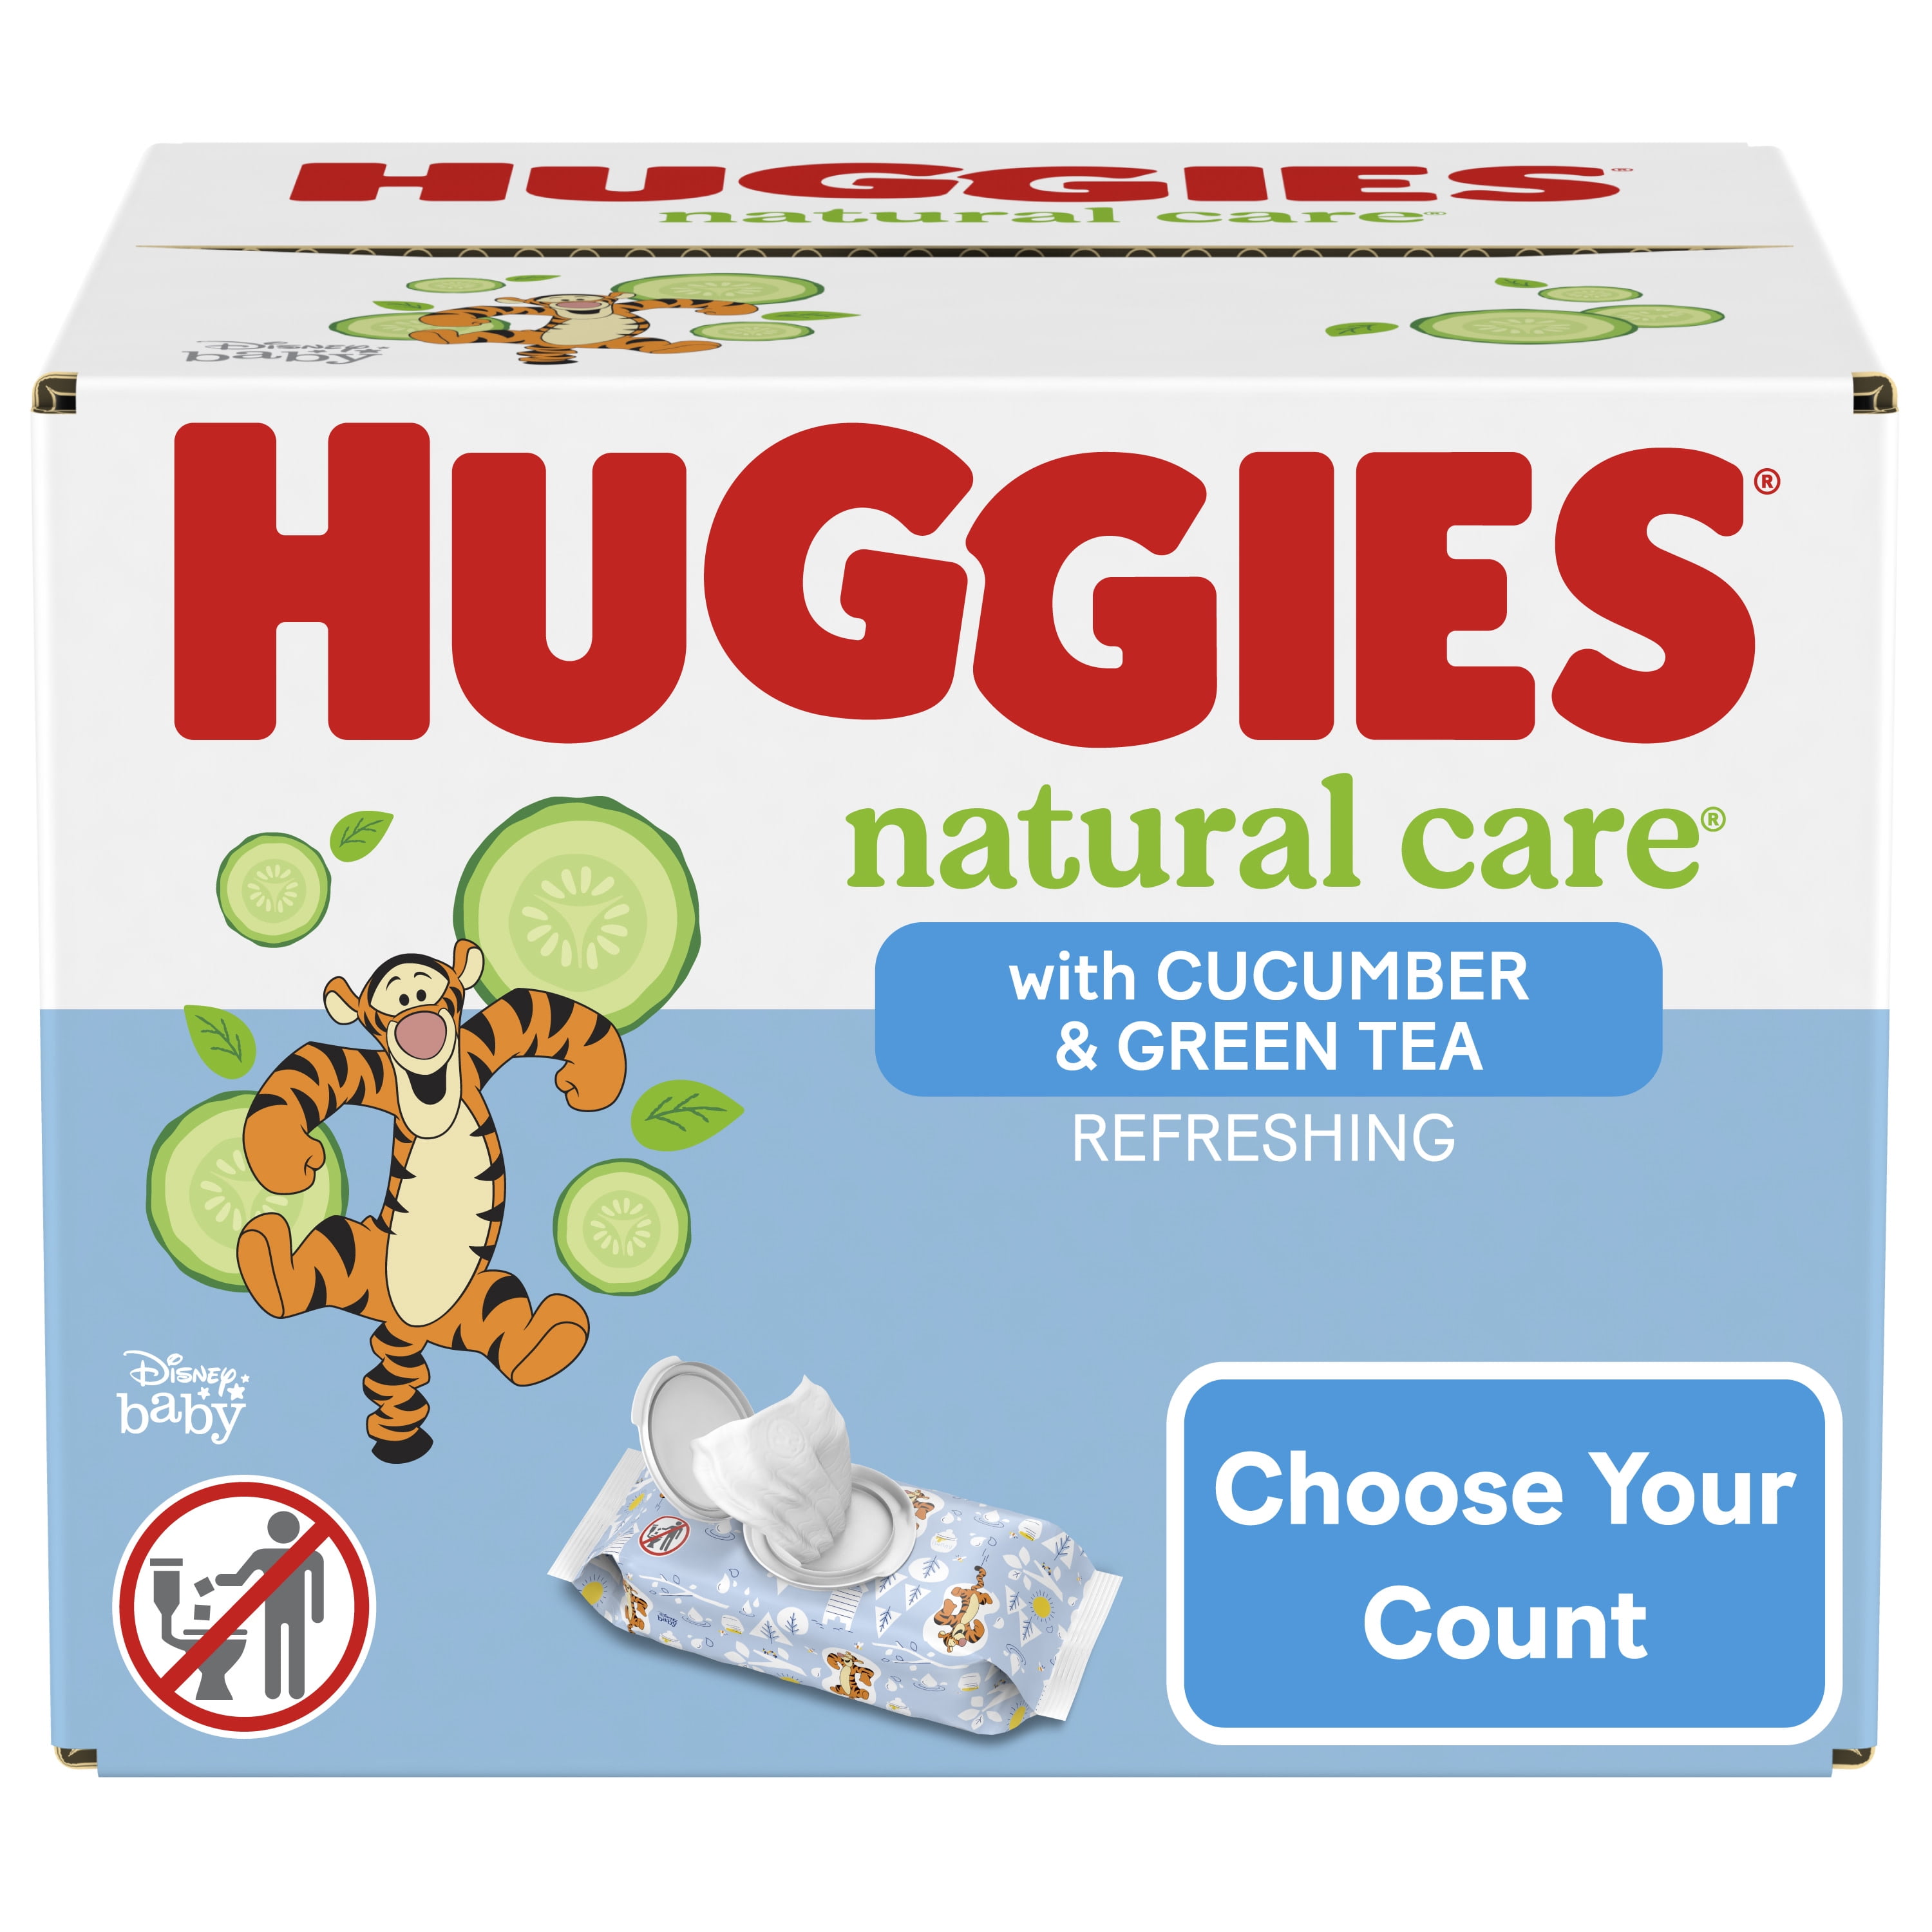 Huggies Natural Care Refreshing Baby Wipes, Scented, 10 Flip-Top Packs (560 Wipes Total)